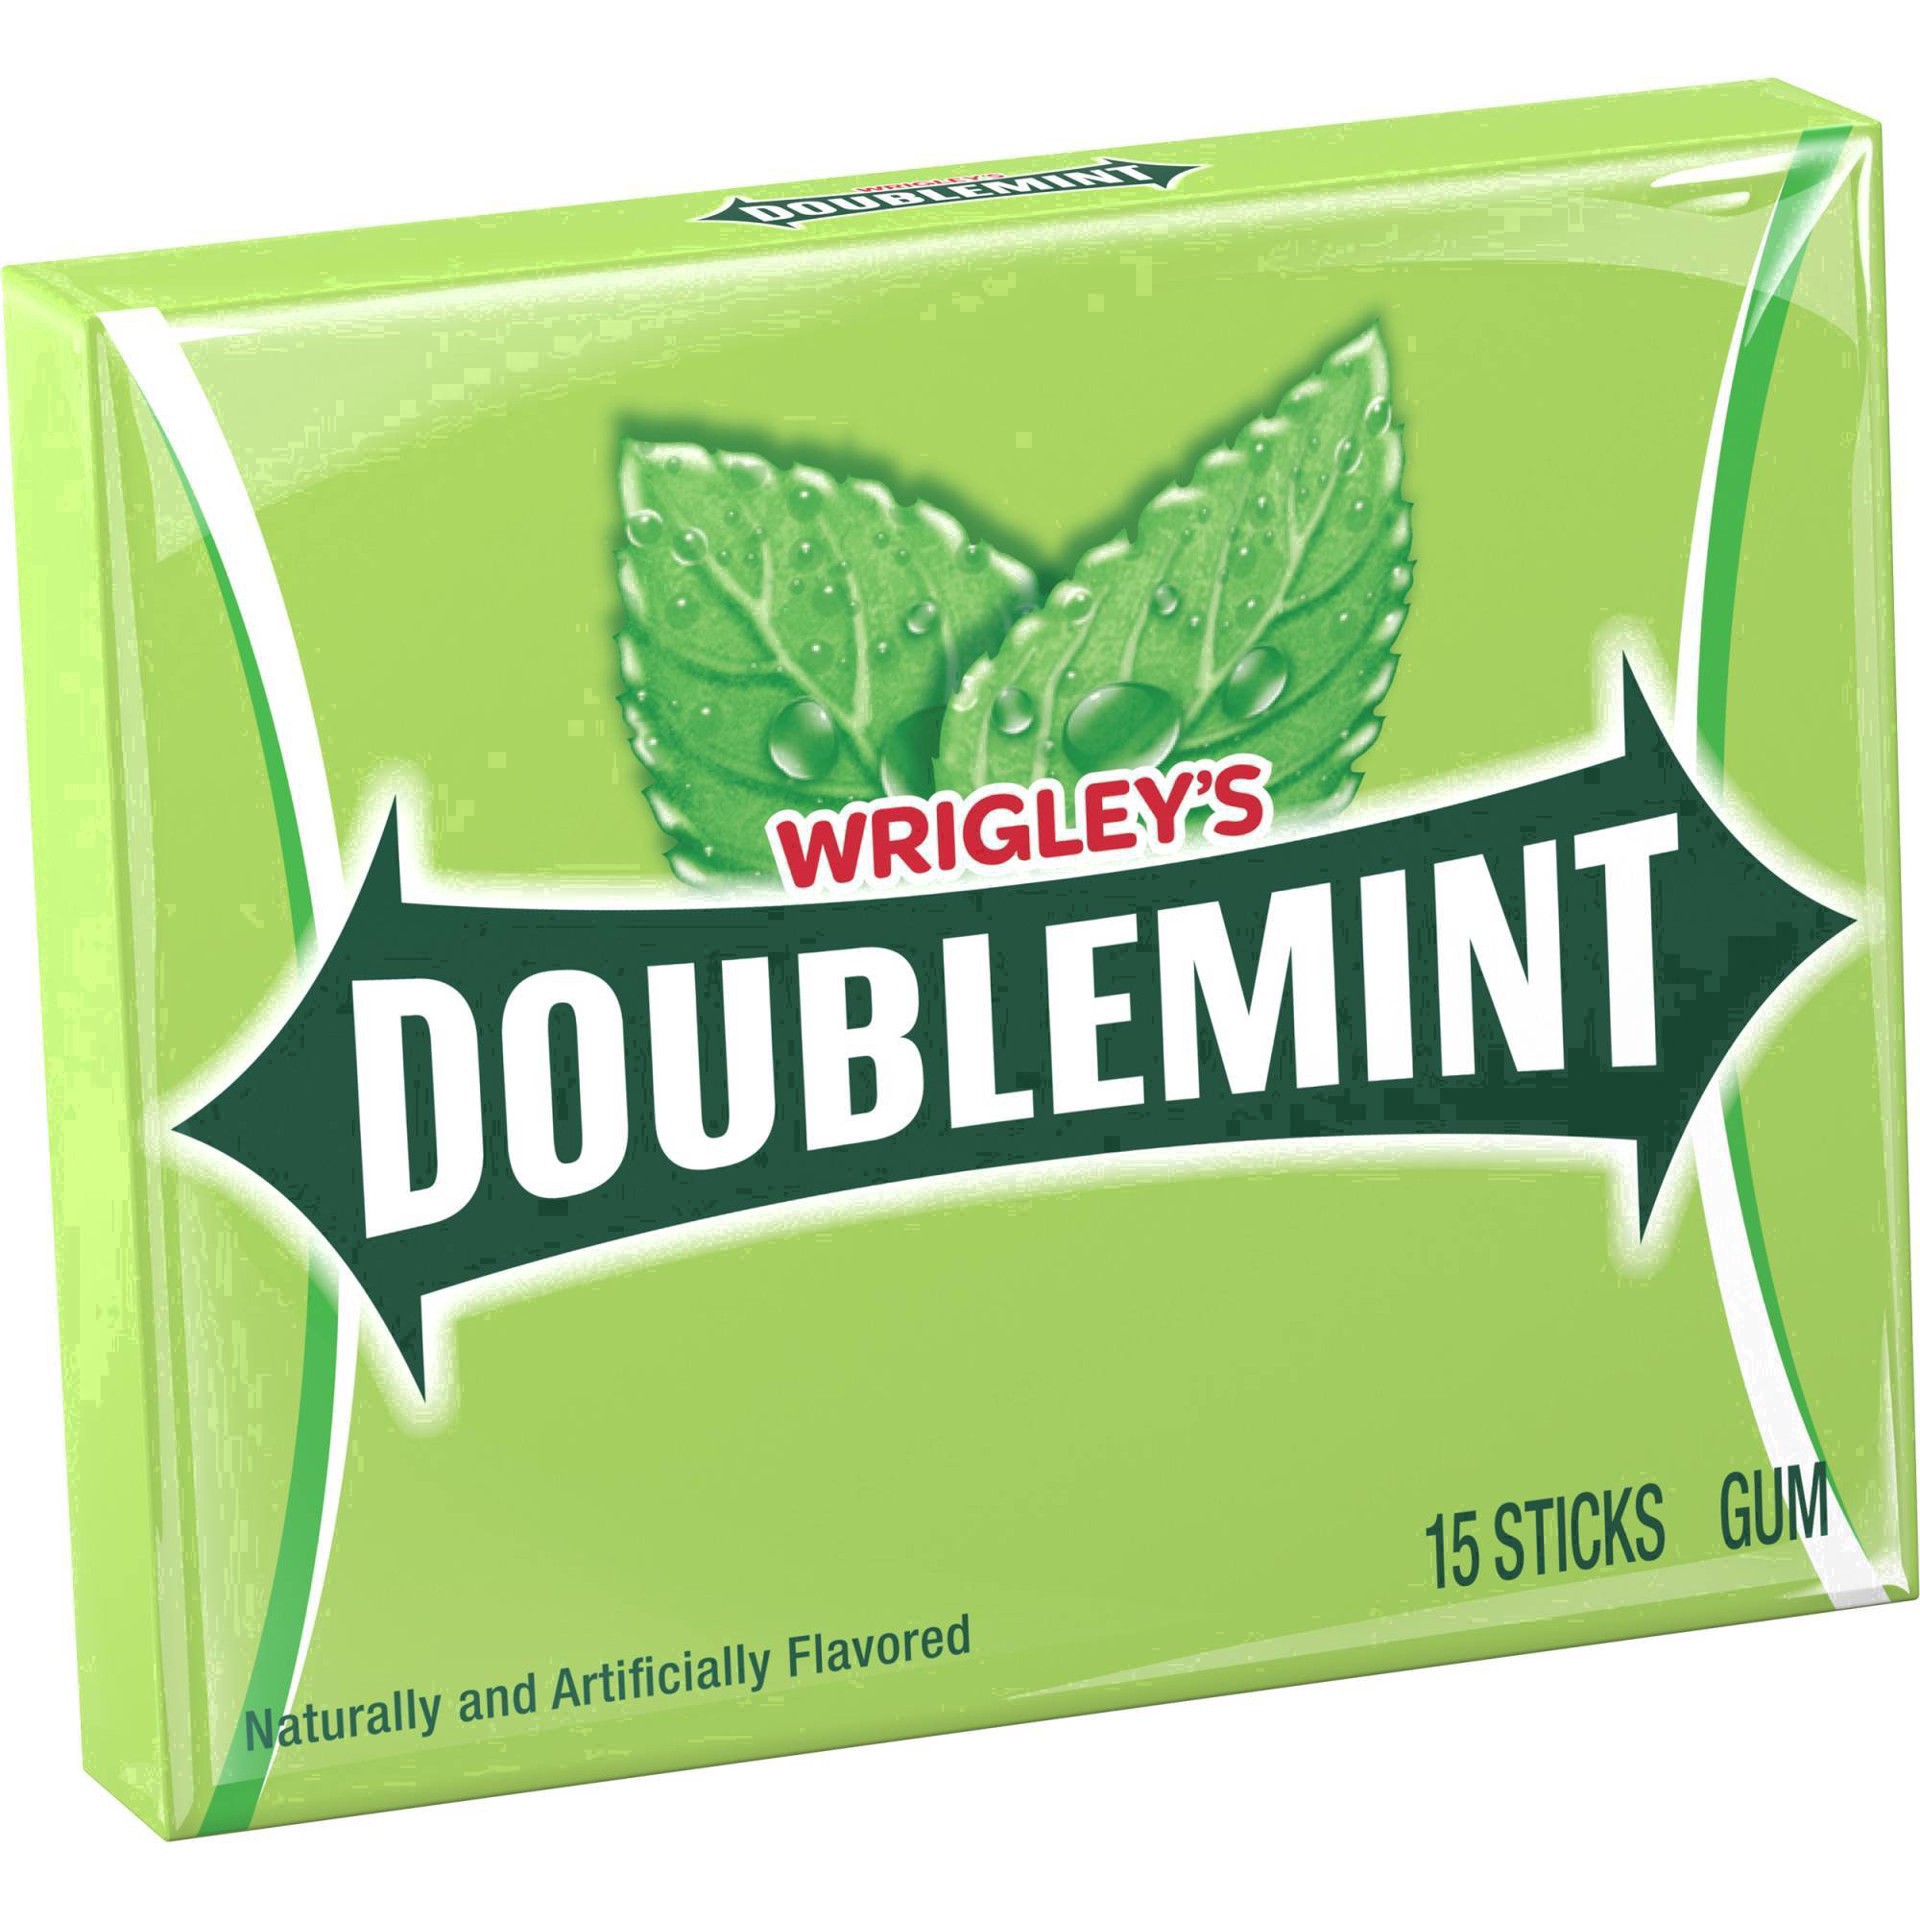 slide 42 of 134, Doublemint WRIGLEY'S DOUBLEMINT Bulk Chewing Gum, Value Pack, 15 ct (3 Pack), 45 ct